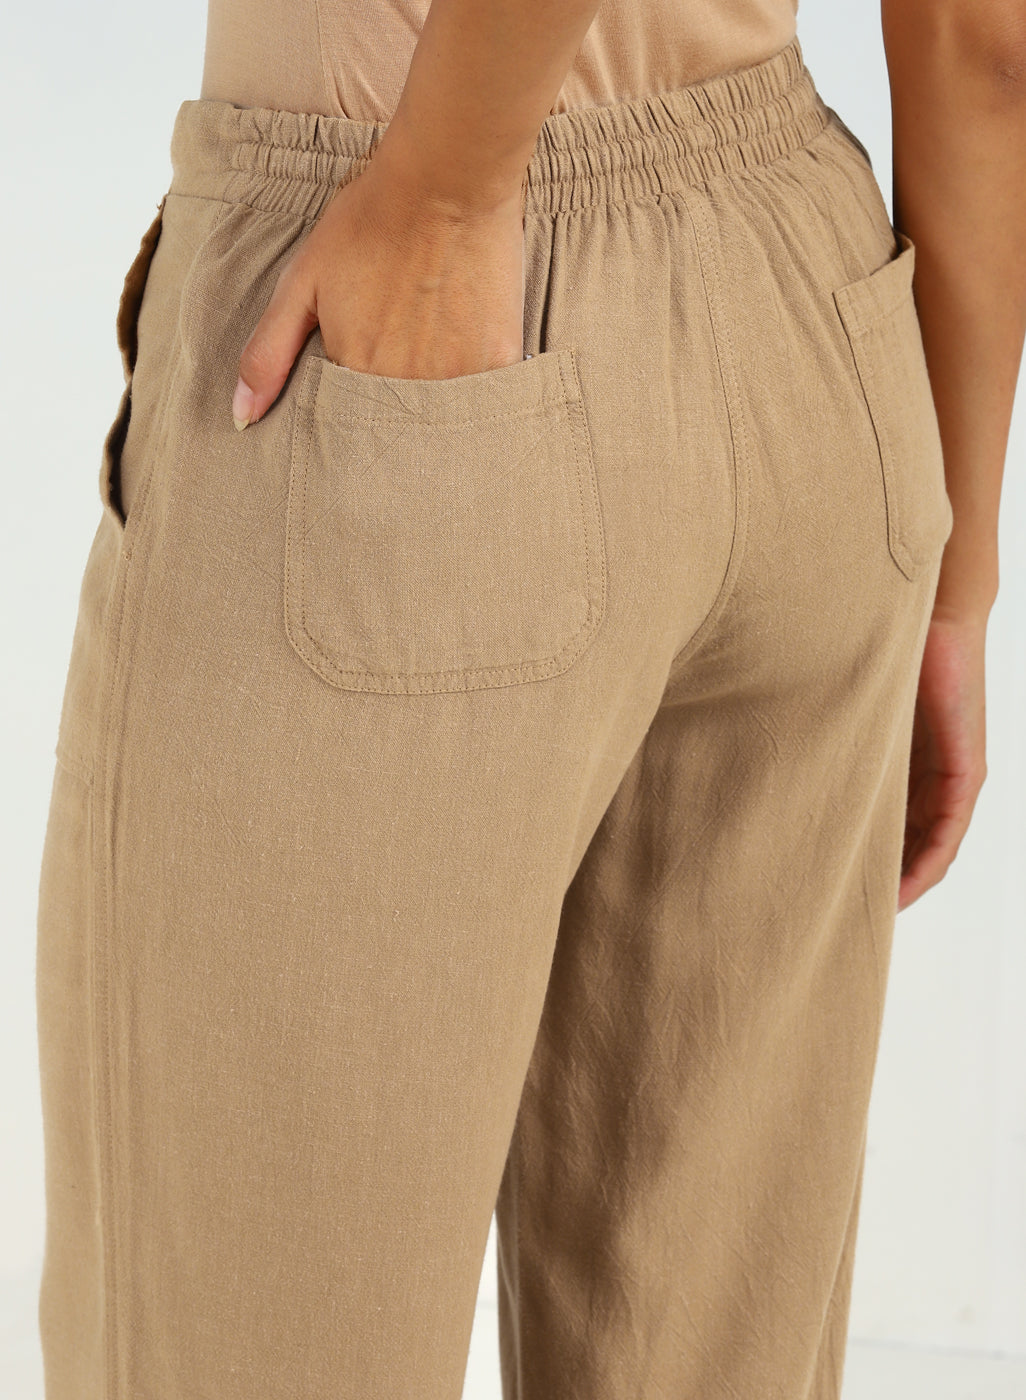 Beige Plain Straight-fit Pants with a Drawstring Waist and Pockets